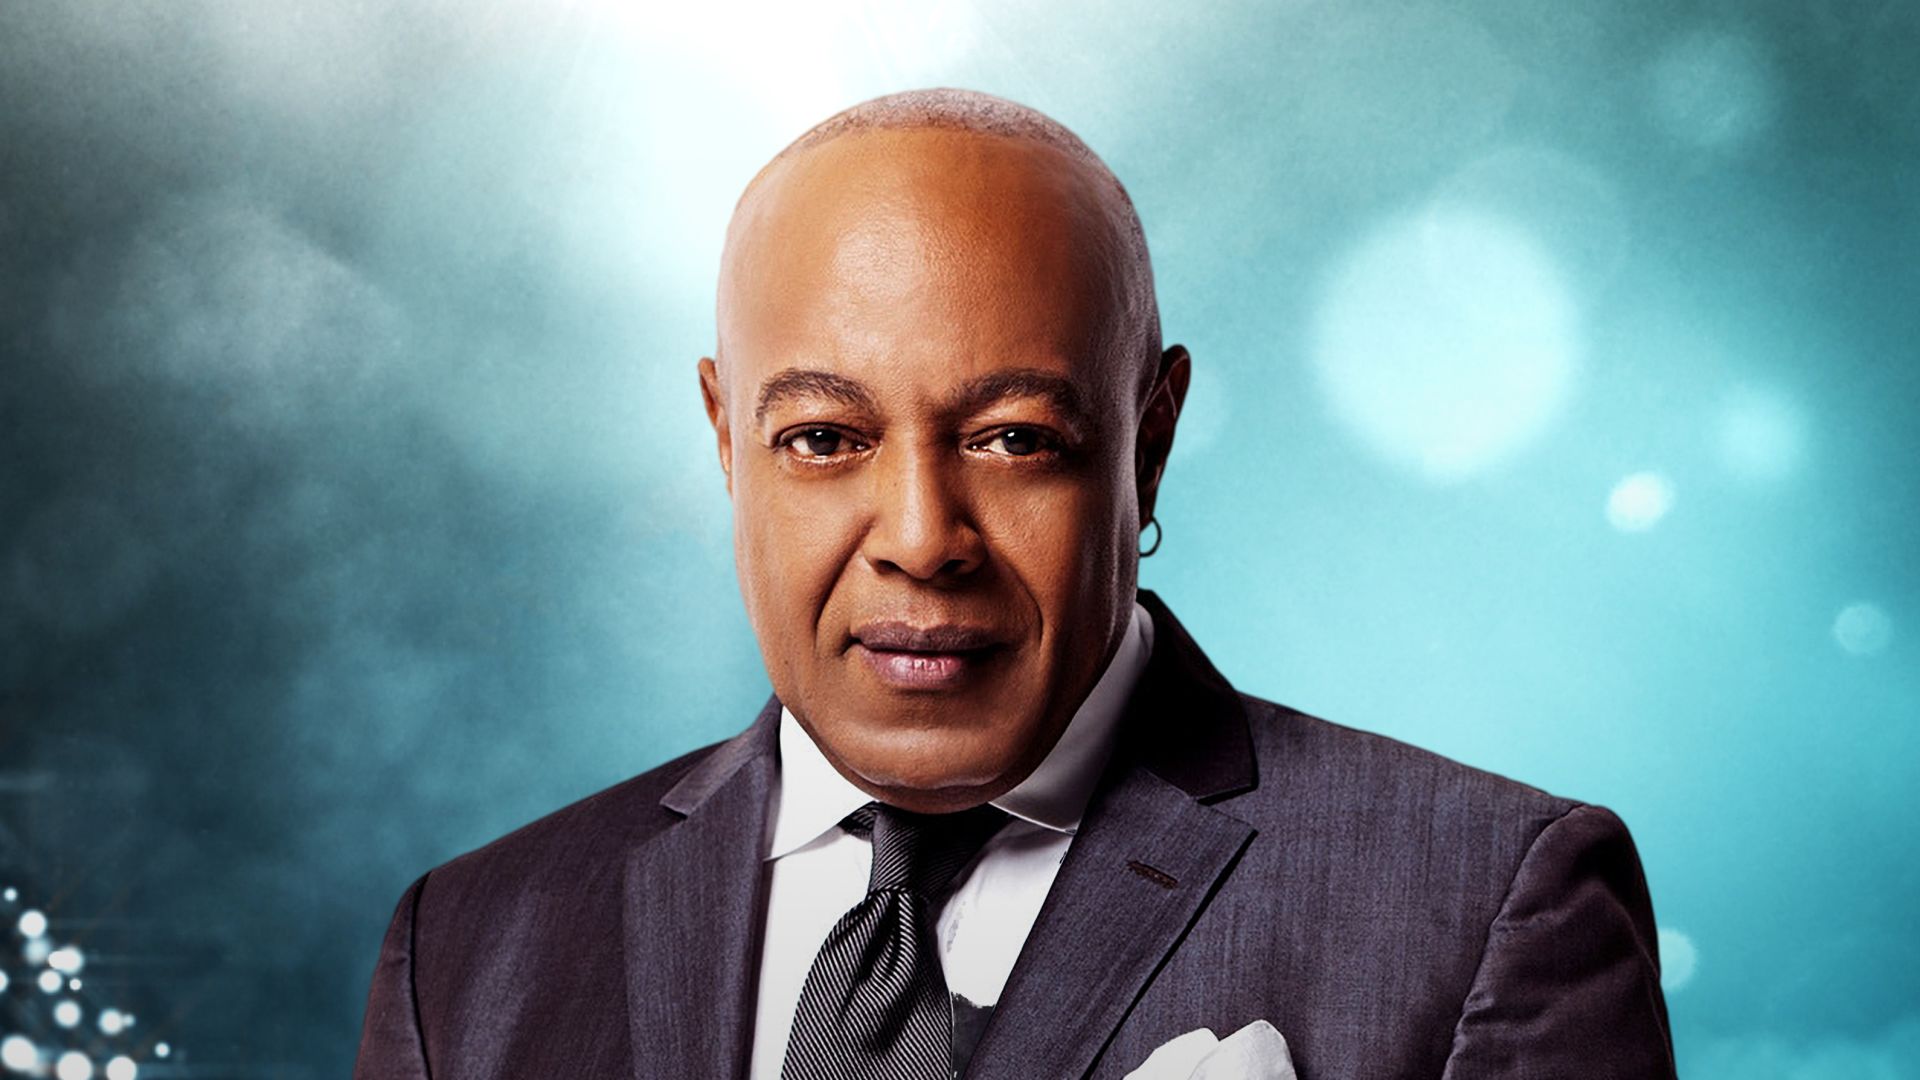 Peabo Bryson Wearing A Suit And Tie